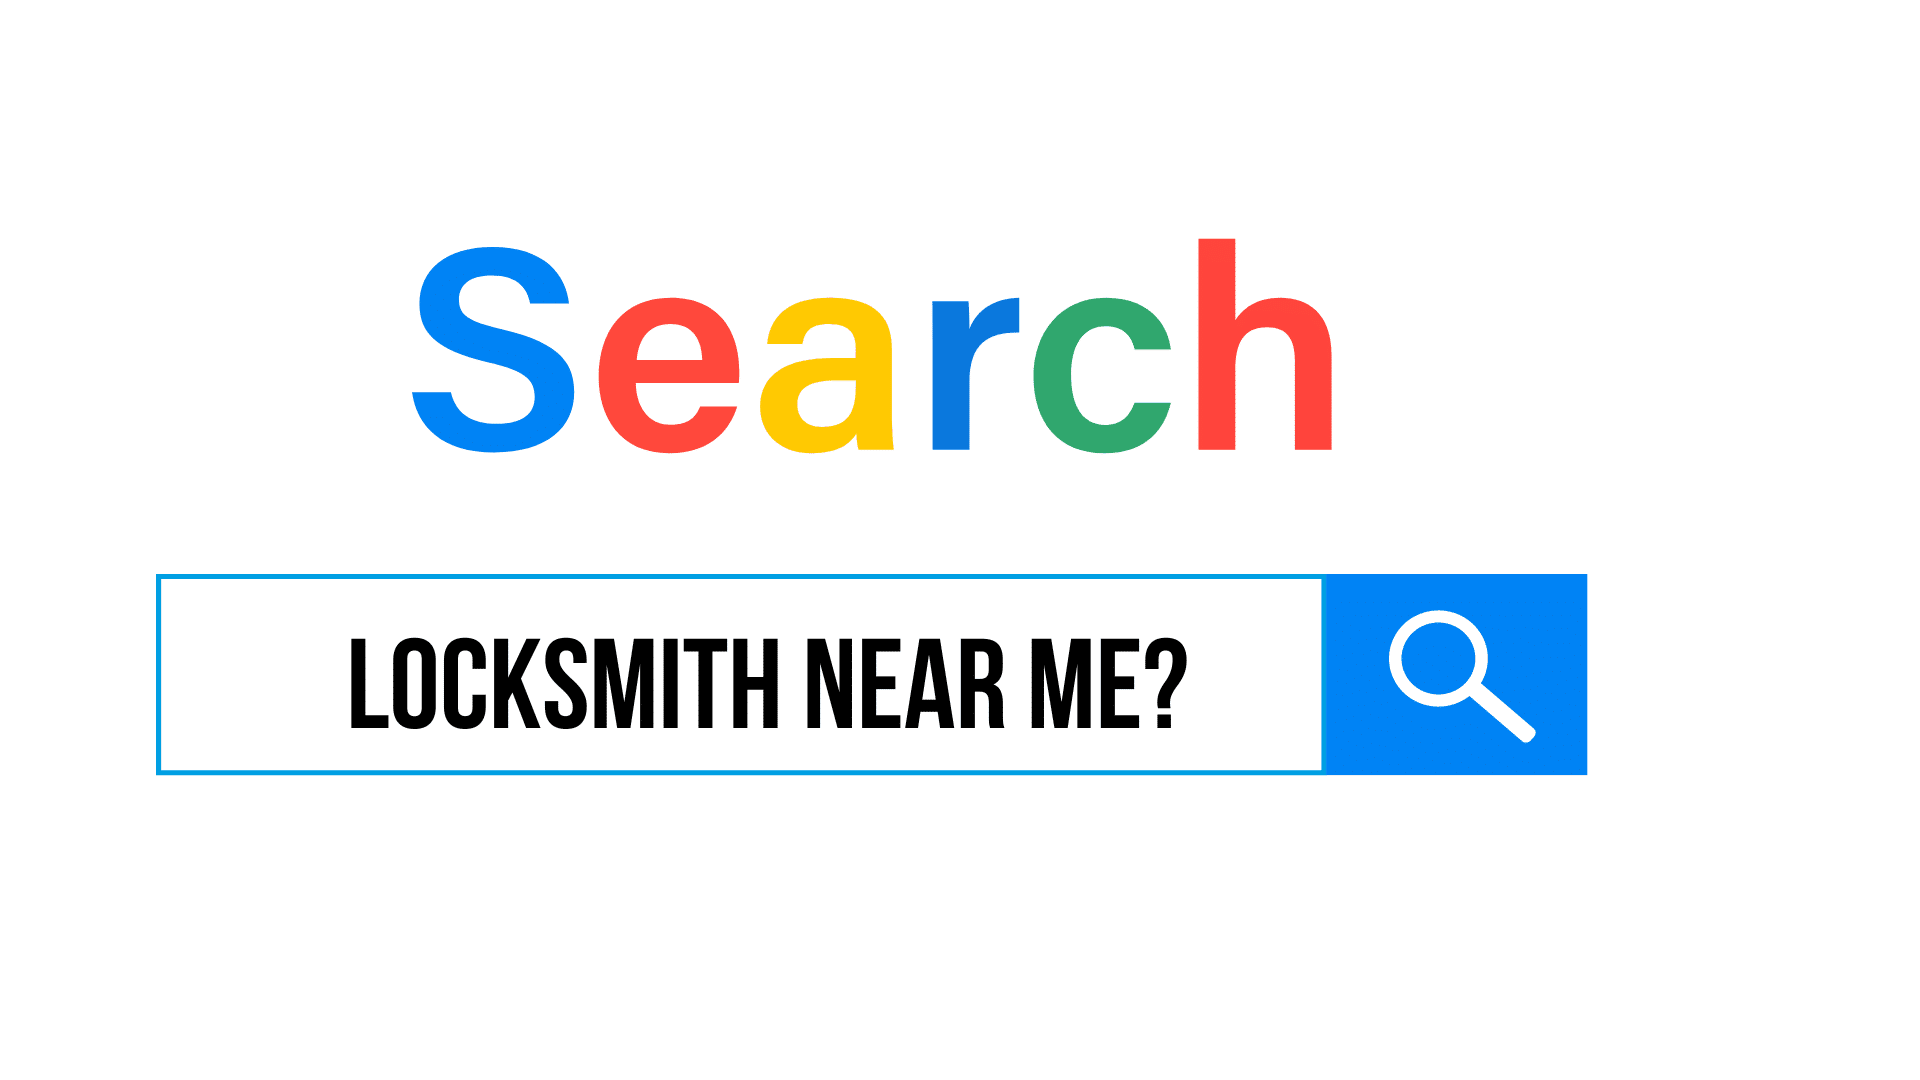 Tips for Finding an Affordable Locksmith Near Me